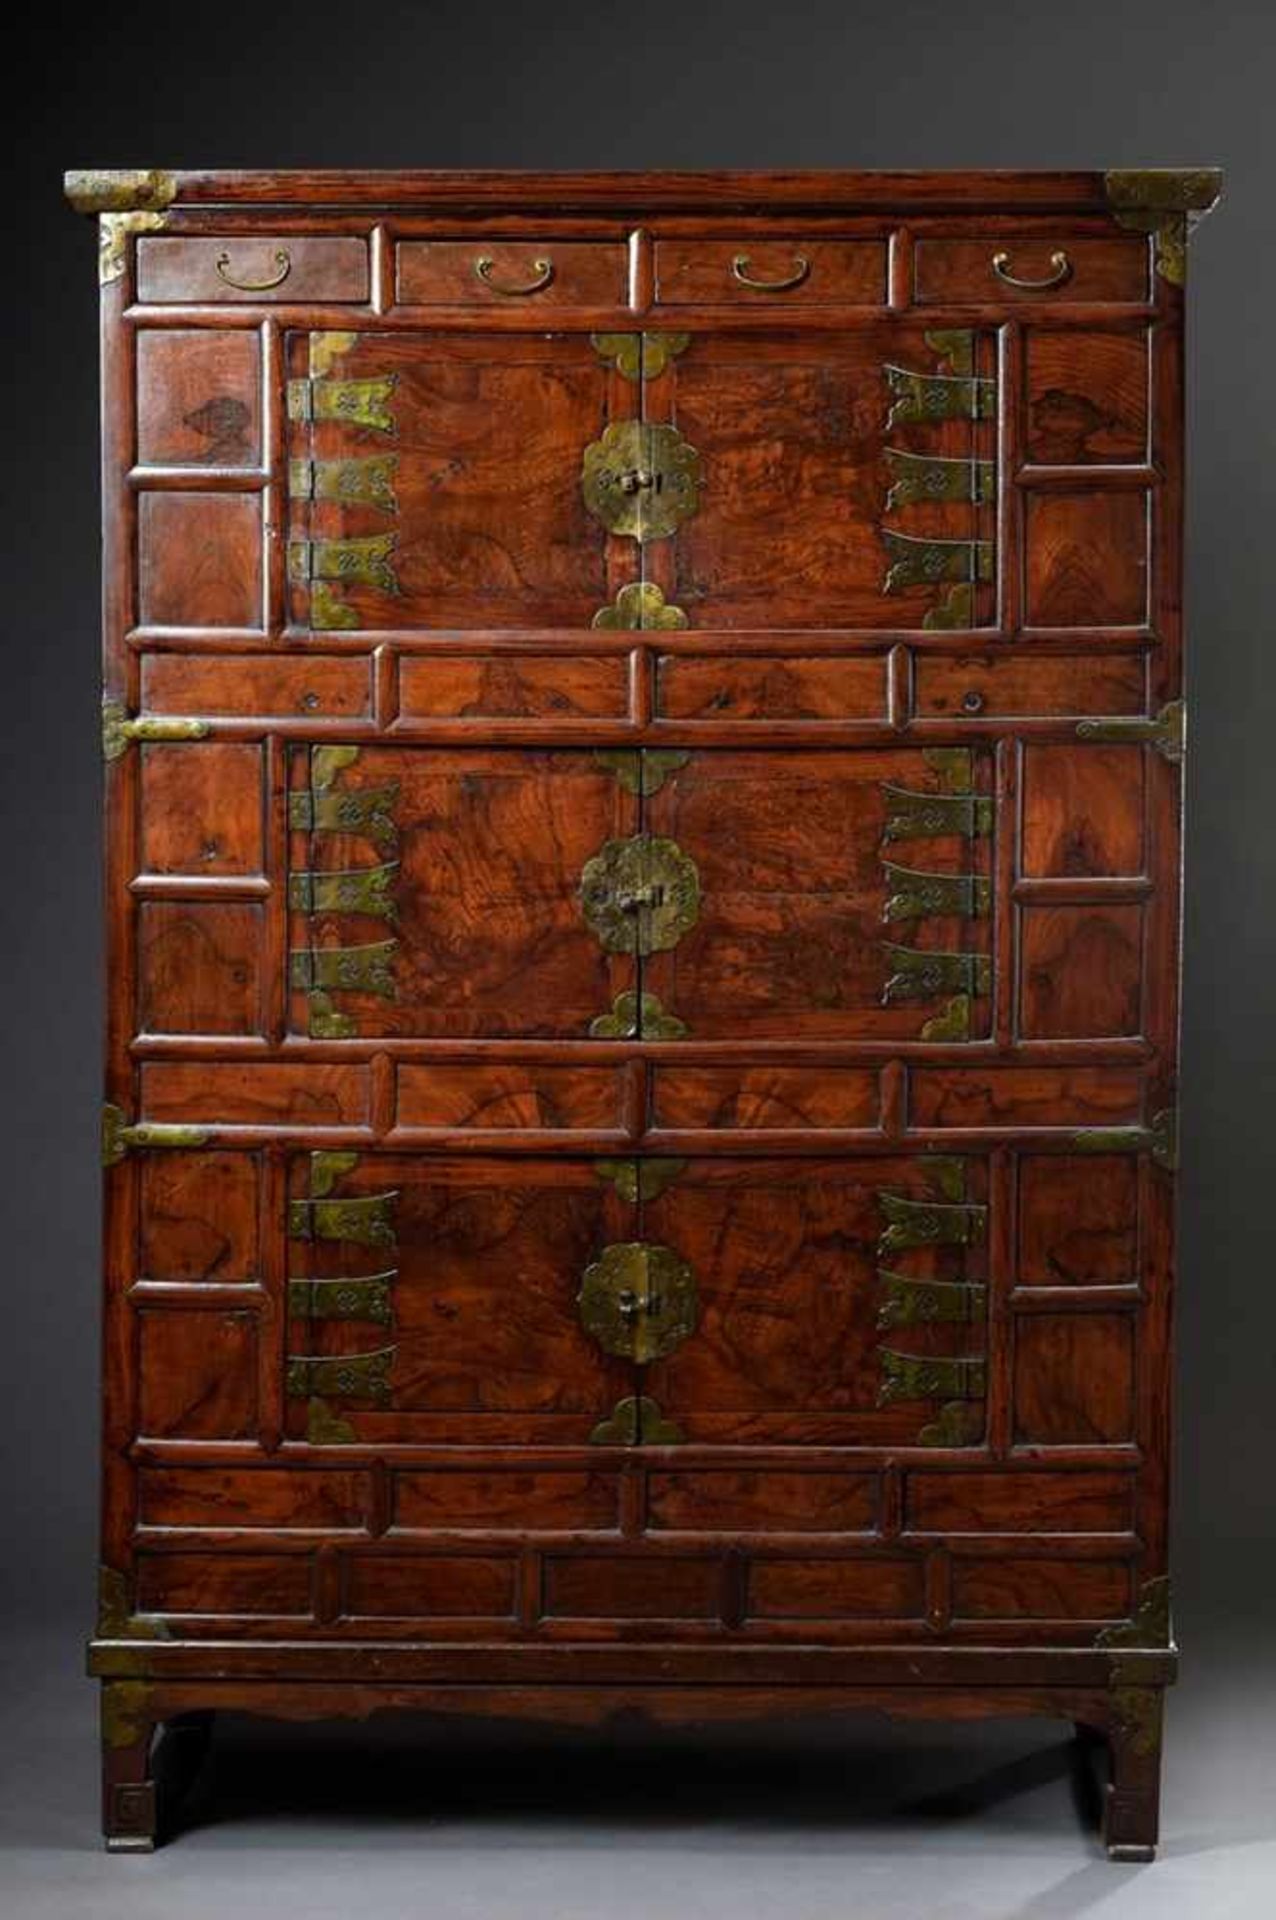 Large Korean "Rice Chest" with three double doors and 4 drawers, walnut with decorative brass